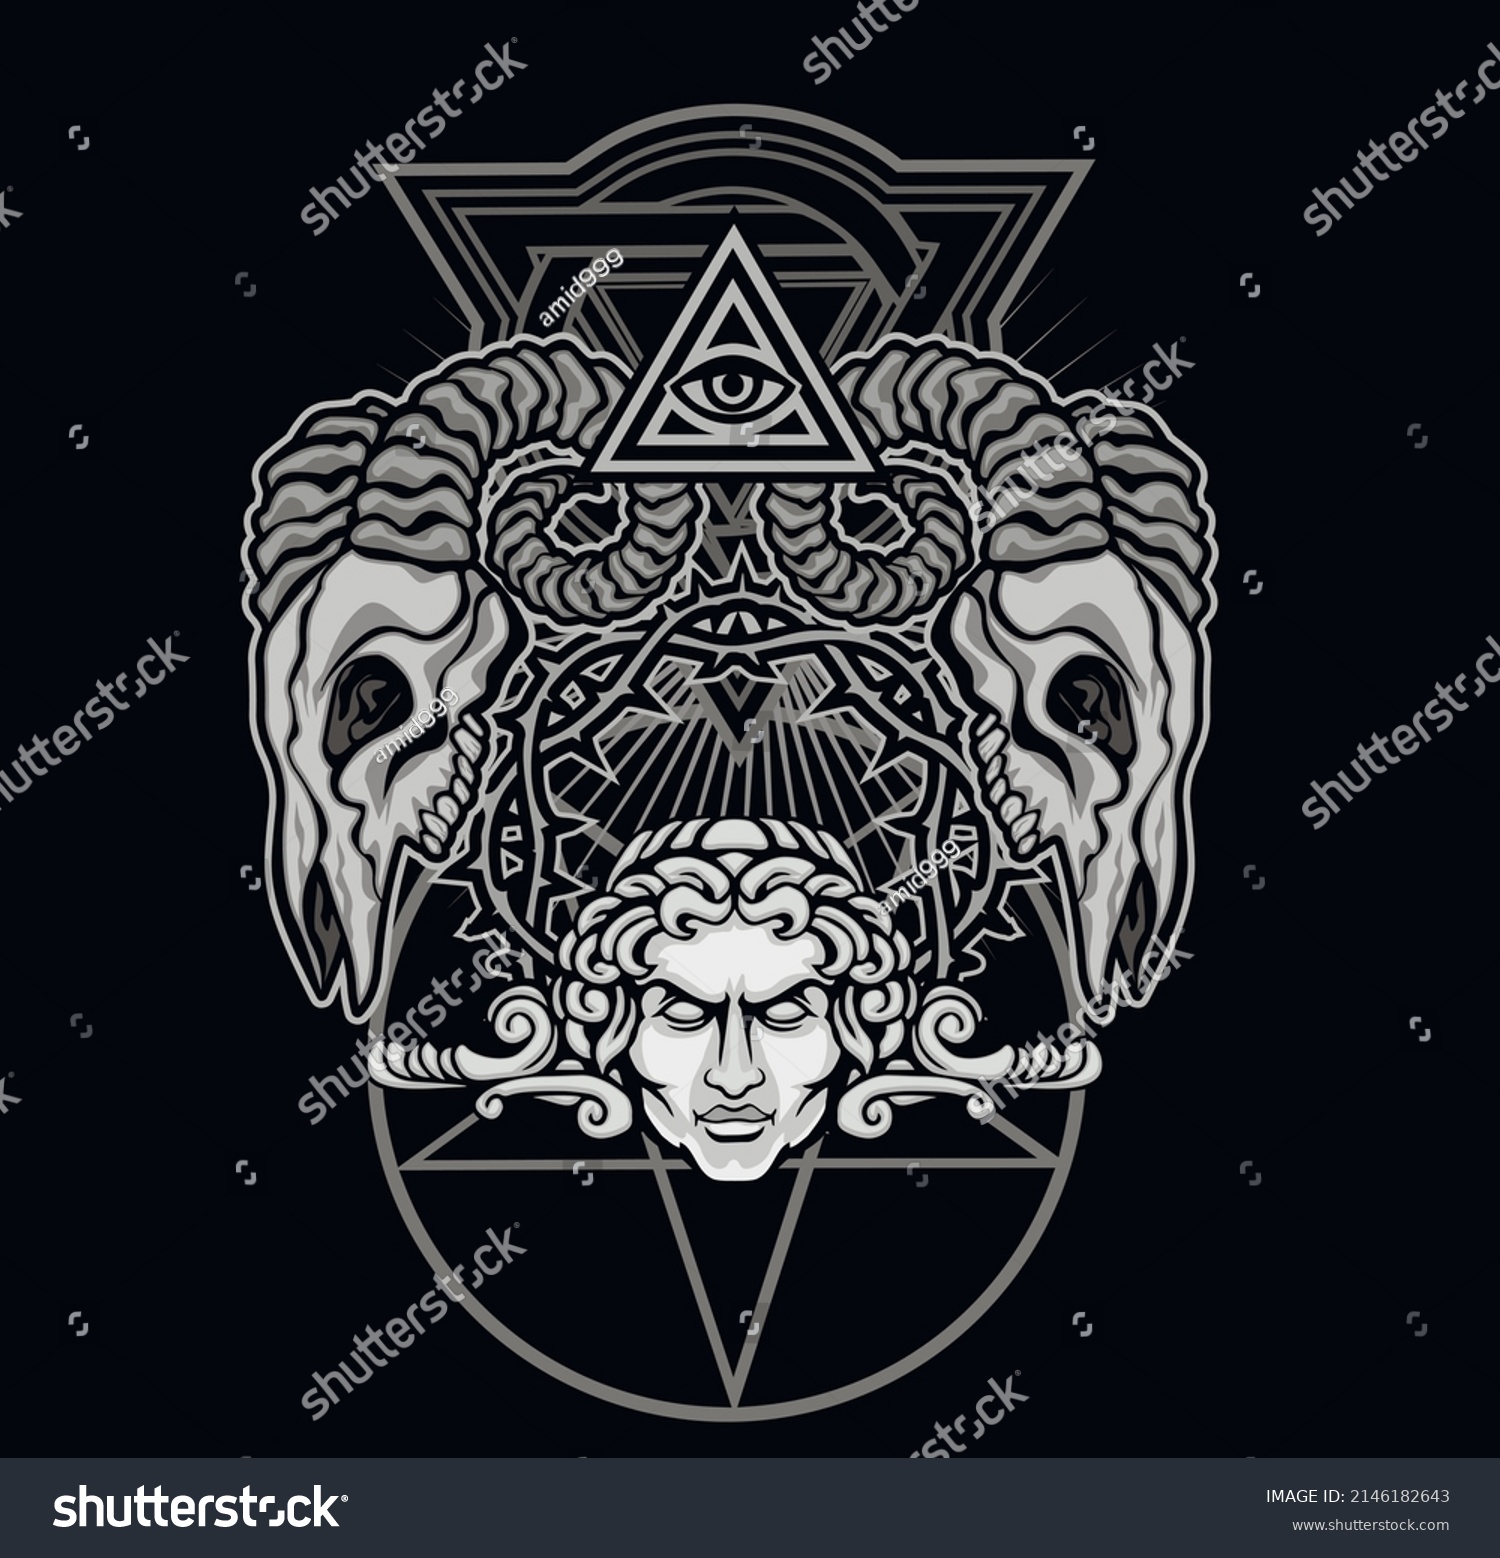 Gothic Sign Aries Skull Grunge Vintage Stock Vector (Royalty Free ...